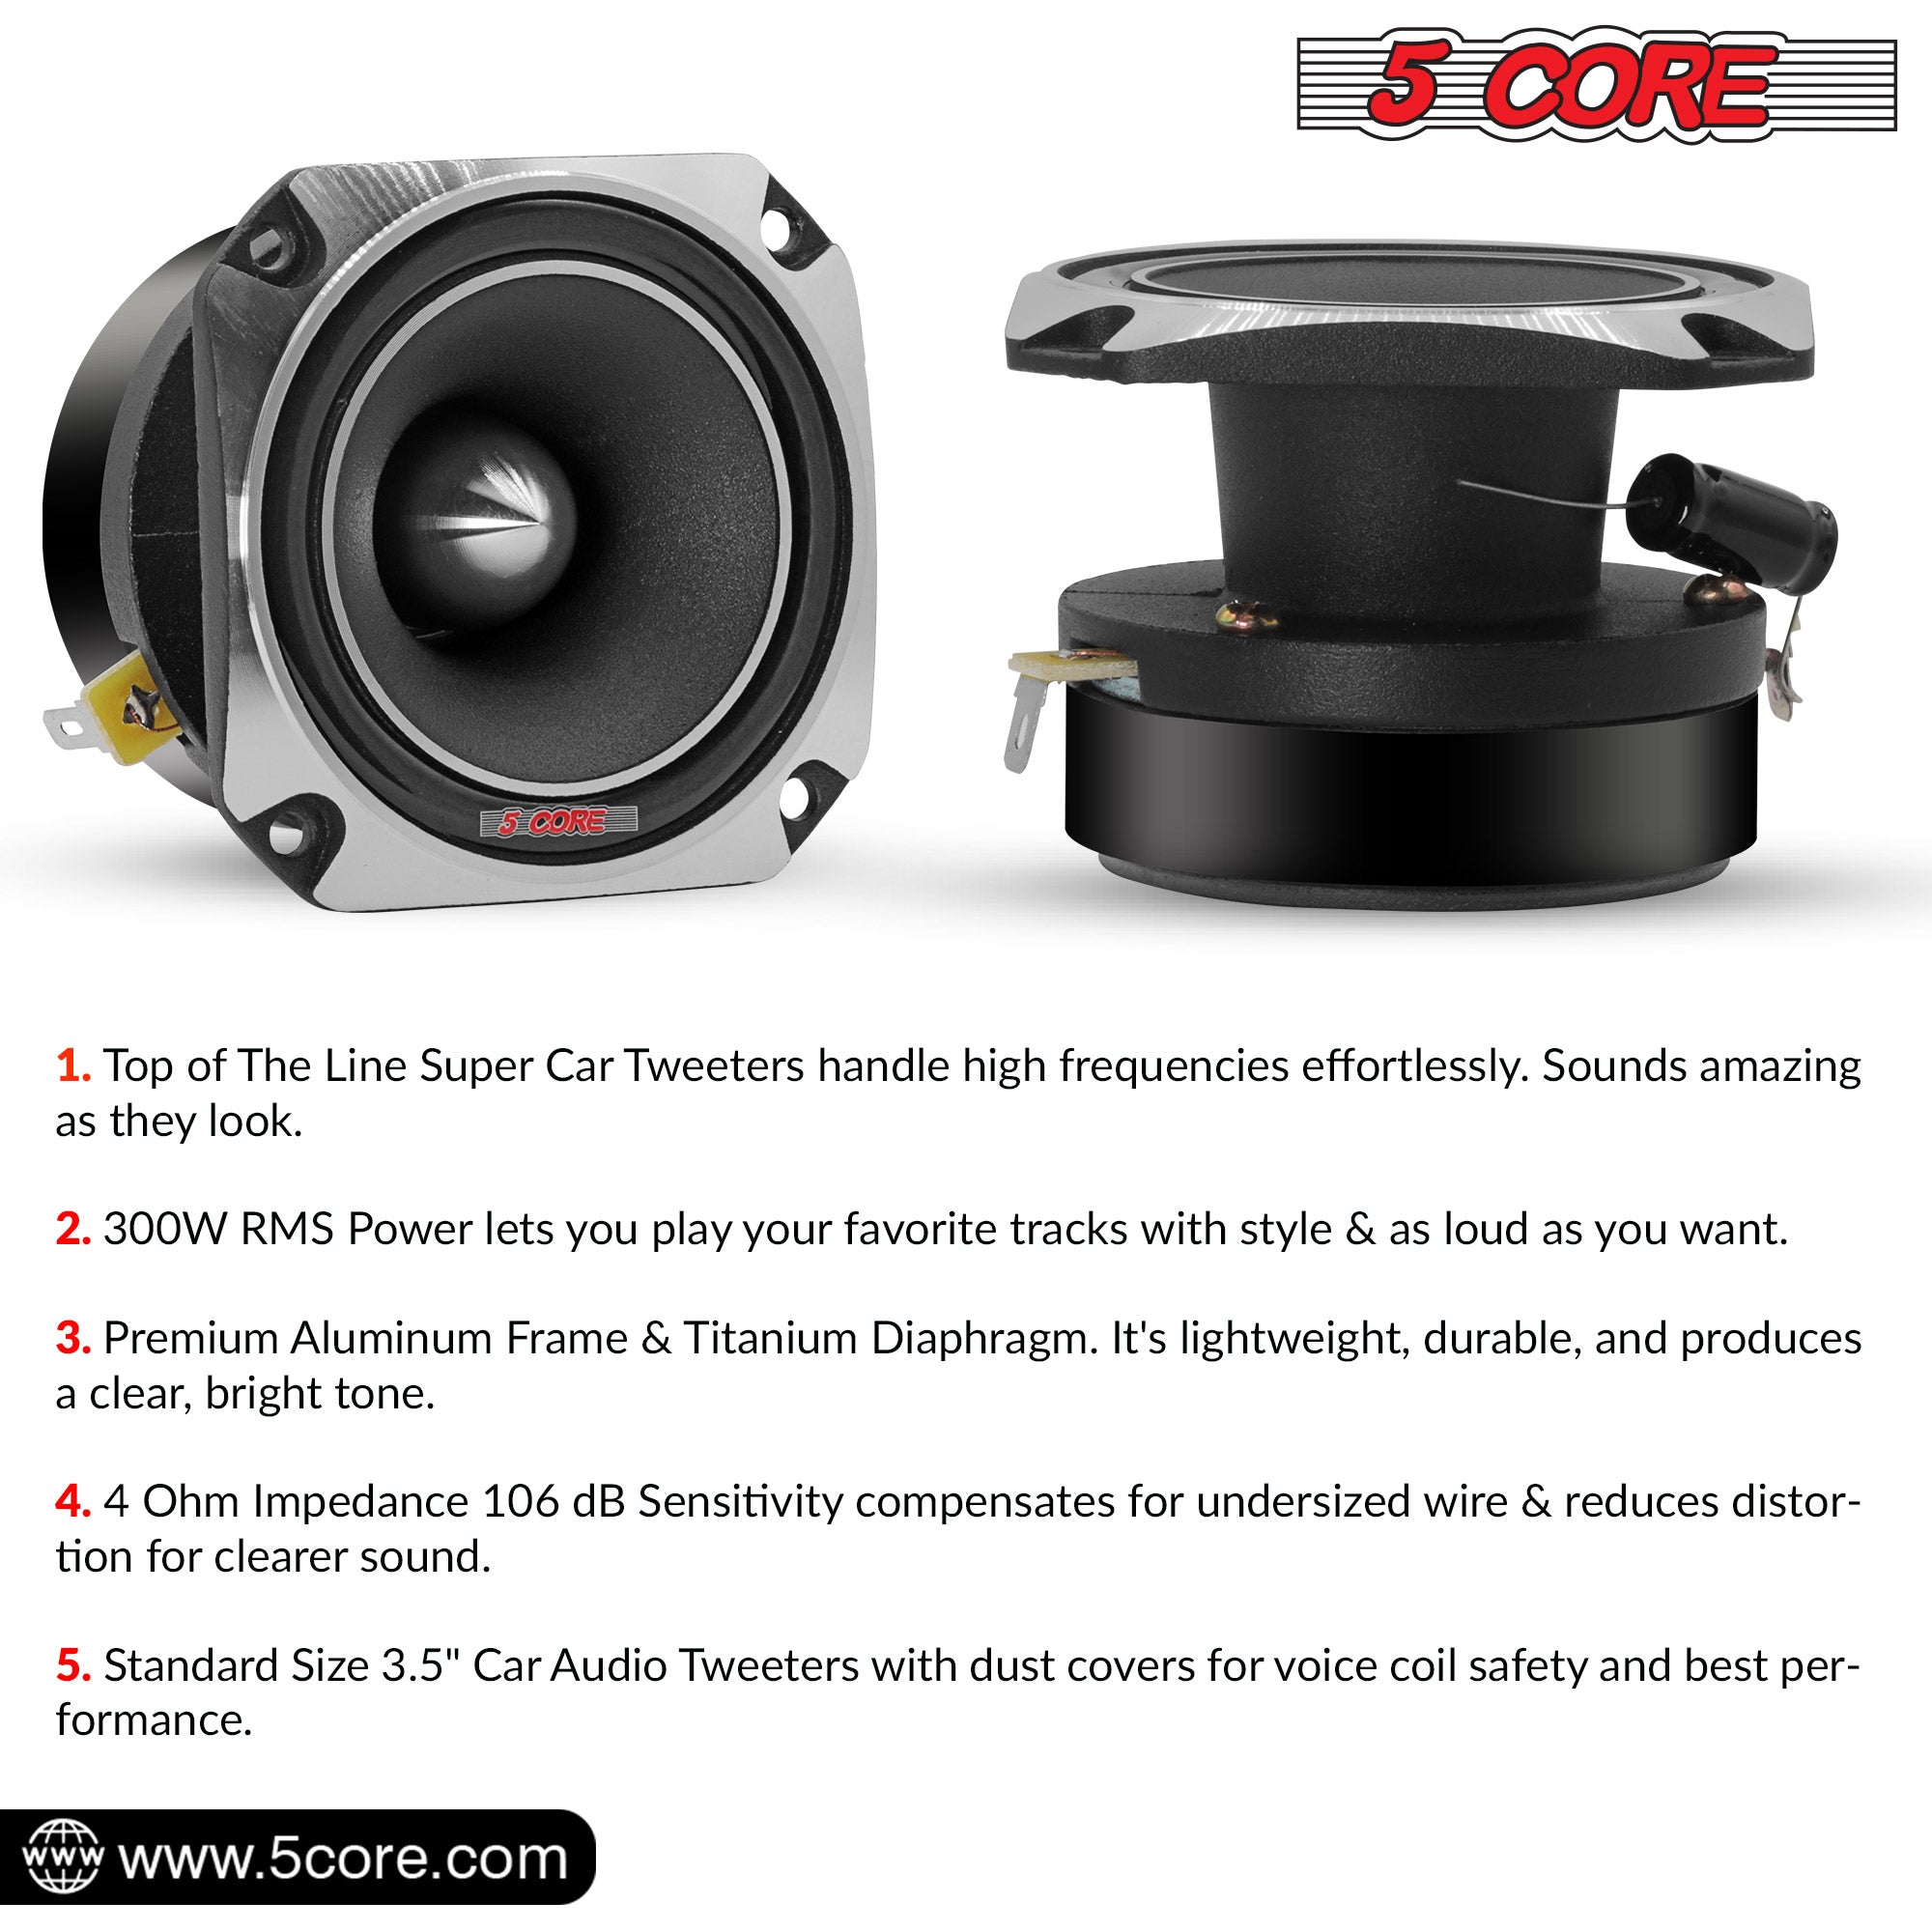 5 Core Car Tweeter Specification - Chrome finish, 300W RMS Combined, 4ohm, 106 dB sensitivity, 2kHz-20kHz frequency range, titanium diaphragm, and more.